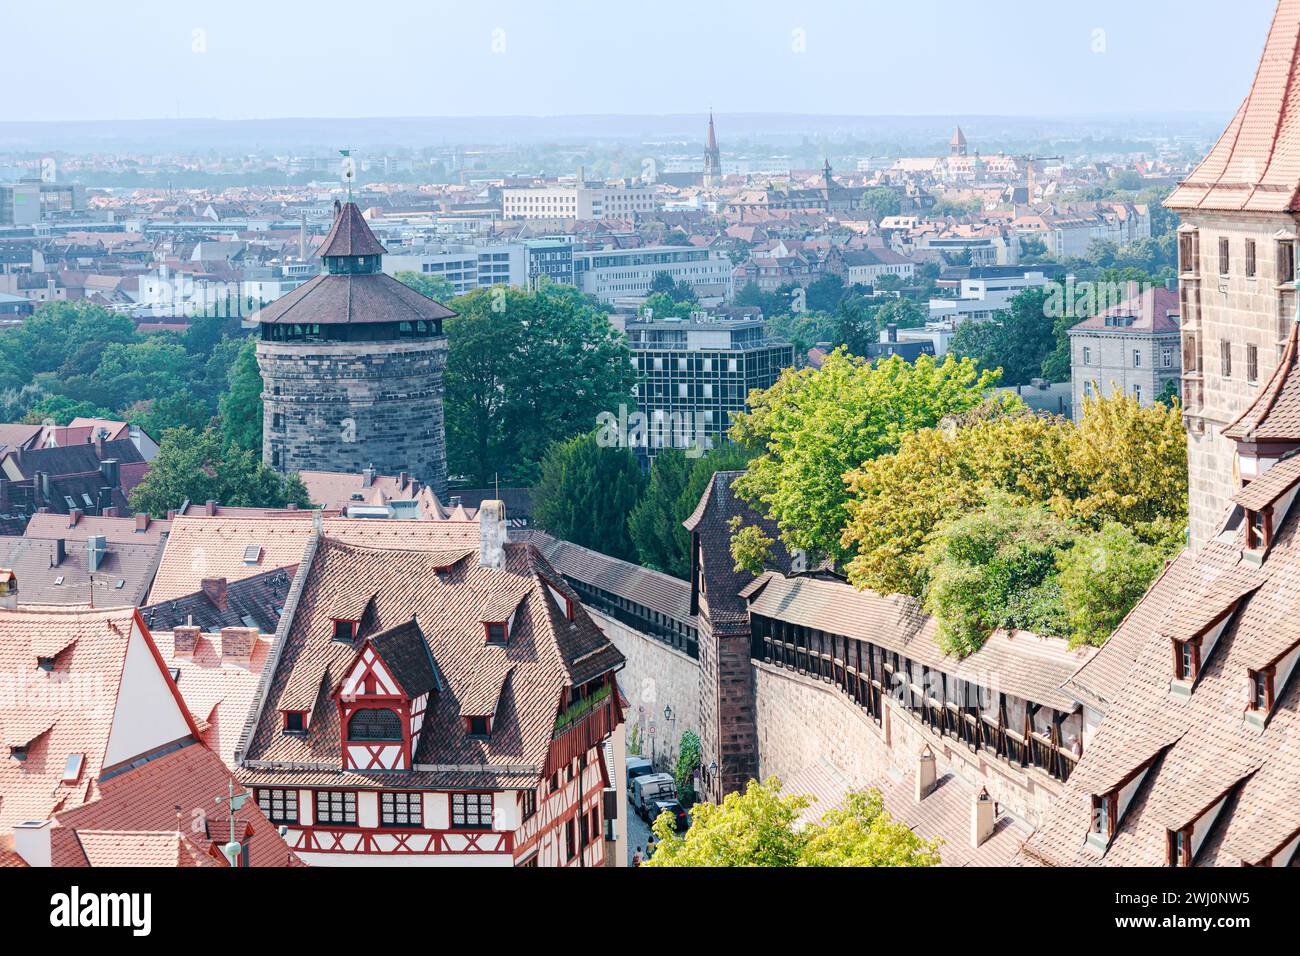 Nuremberg old town, view over the city Stock Photo